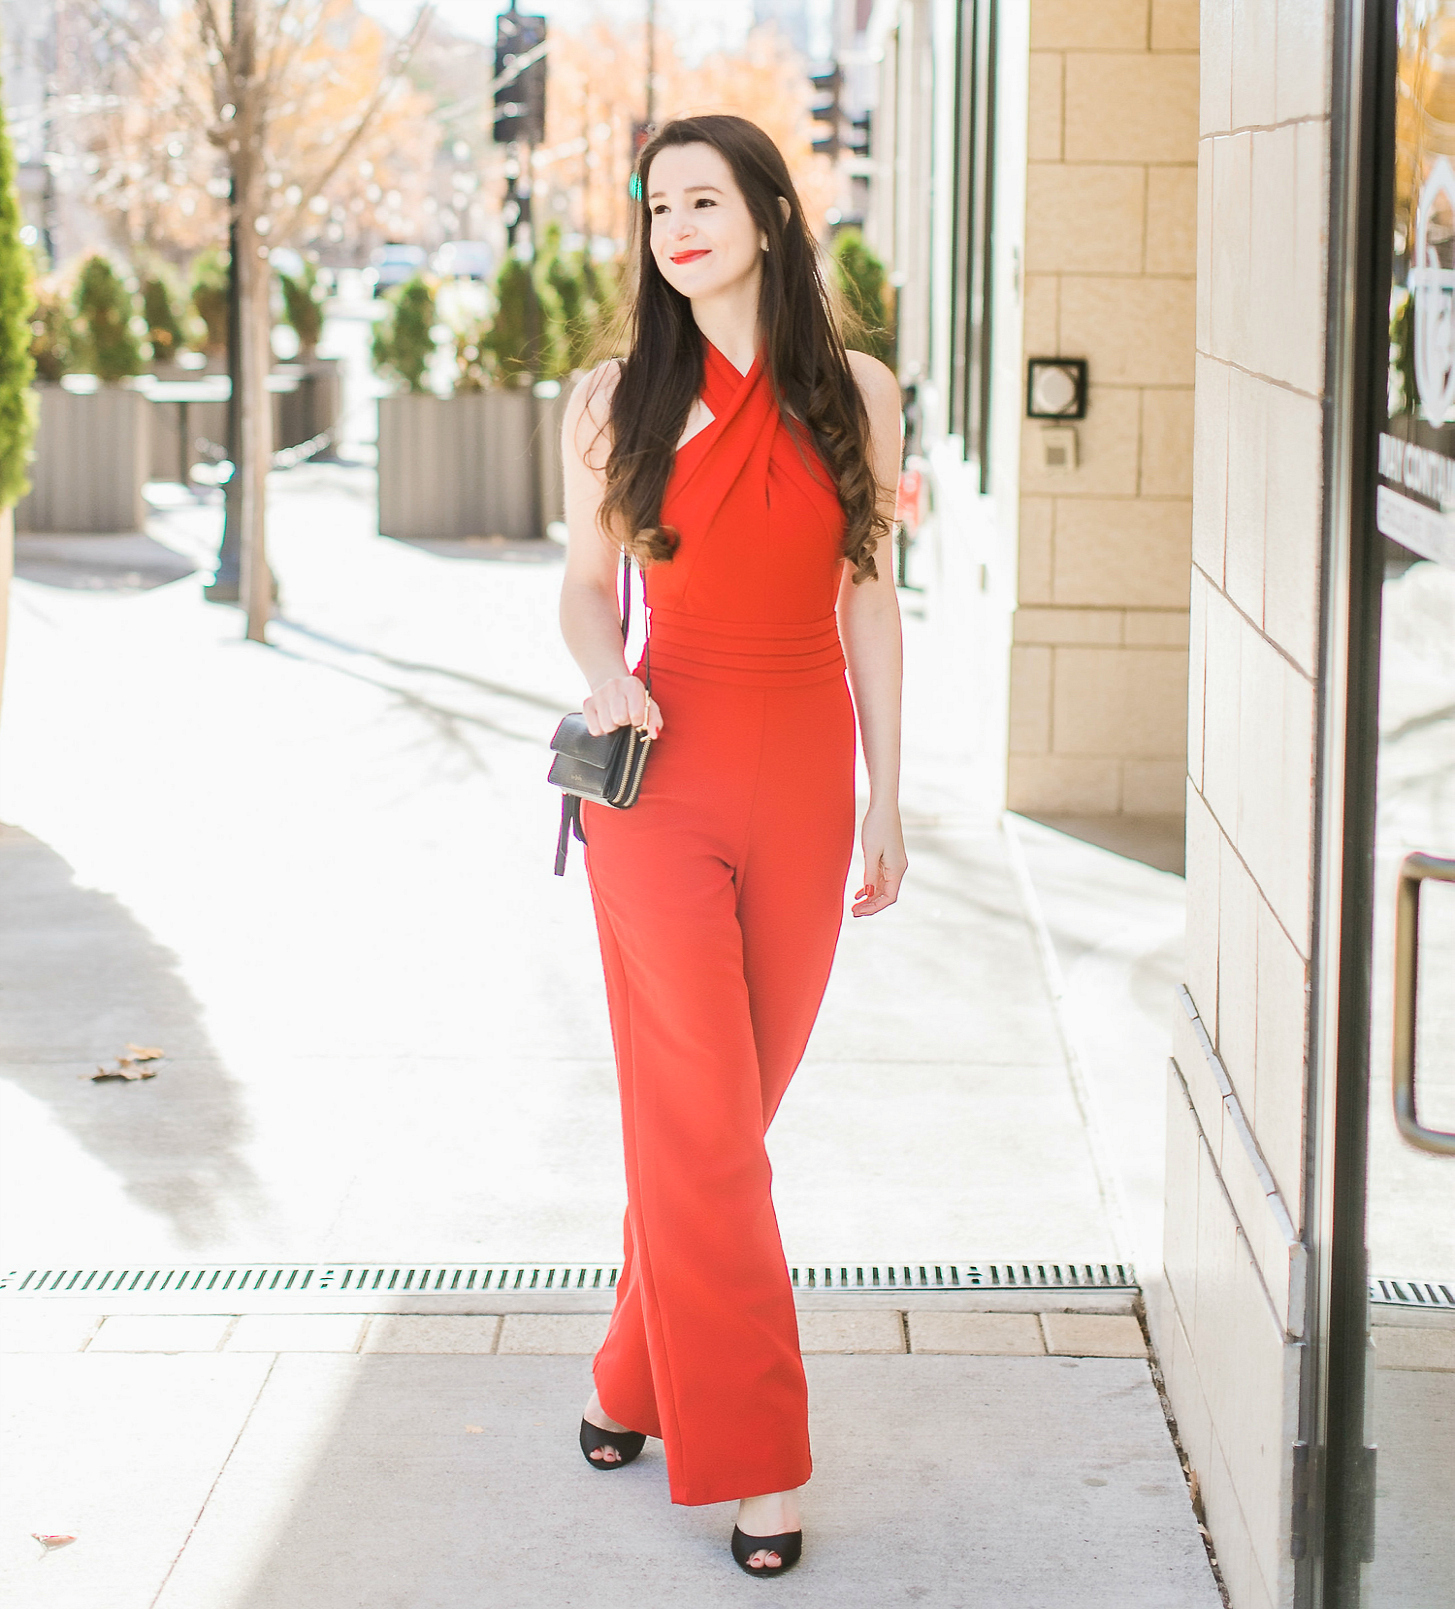 Holiday jumpsuit formal wear styled by affordable fashion blogger Stephanie Ziajka on Diary of a Debutante